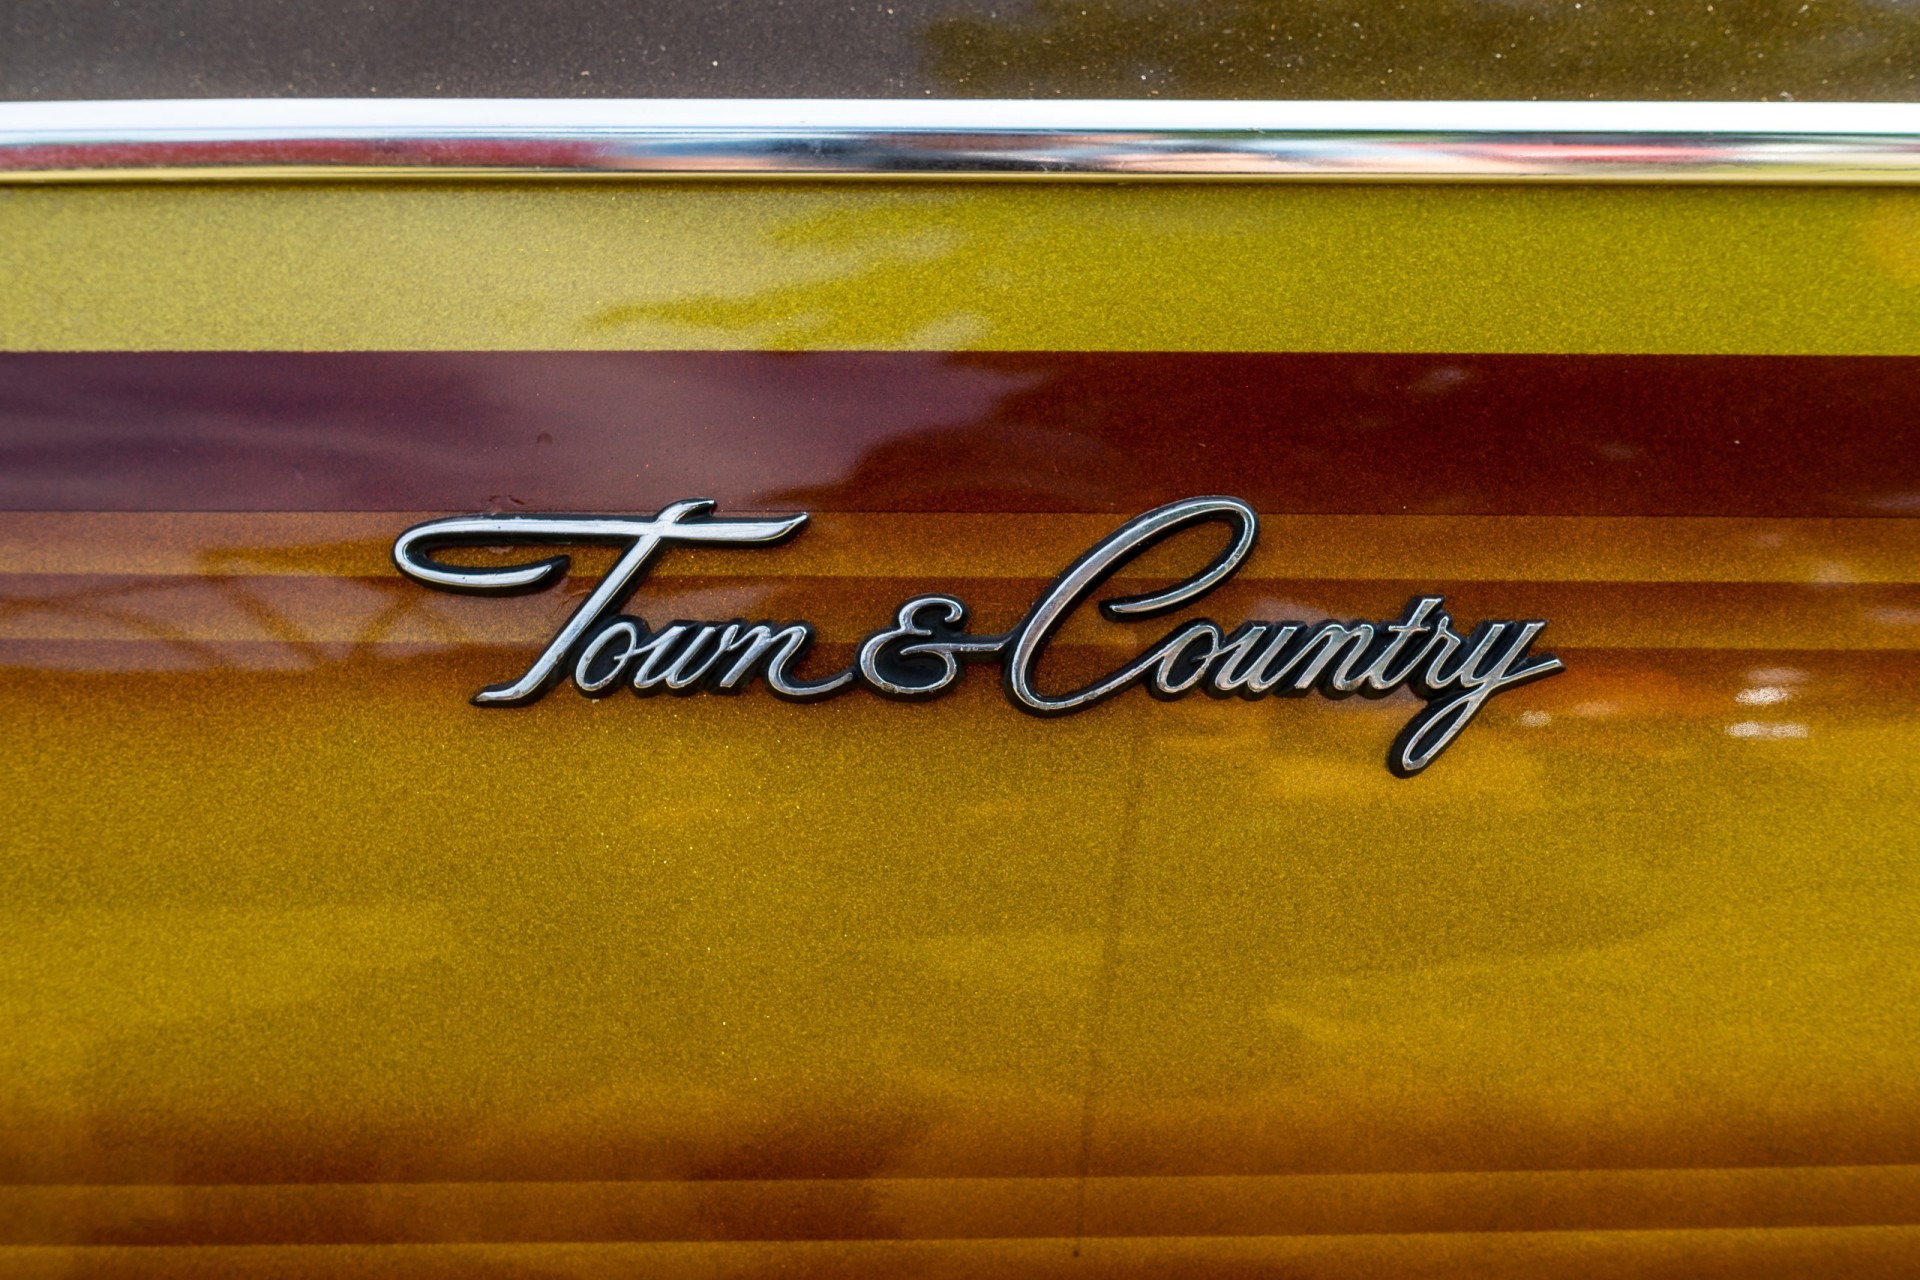 Emblem at the full-size car Chrysler Town & Country